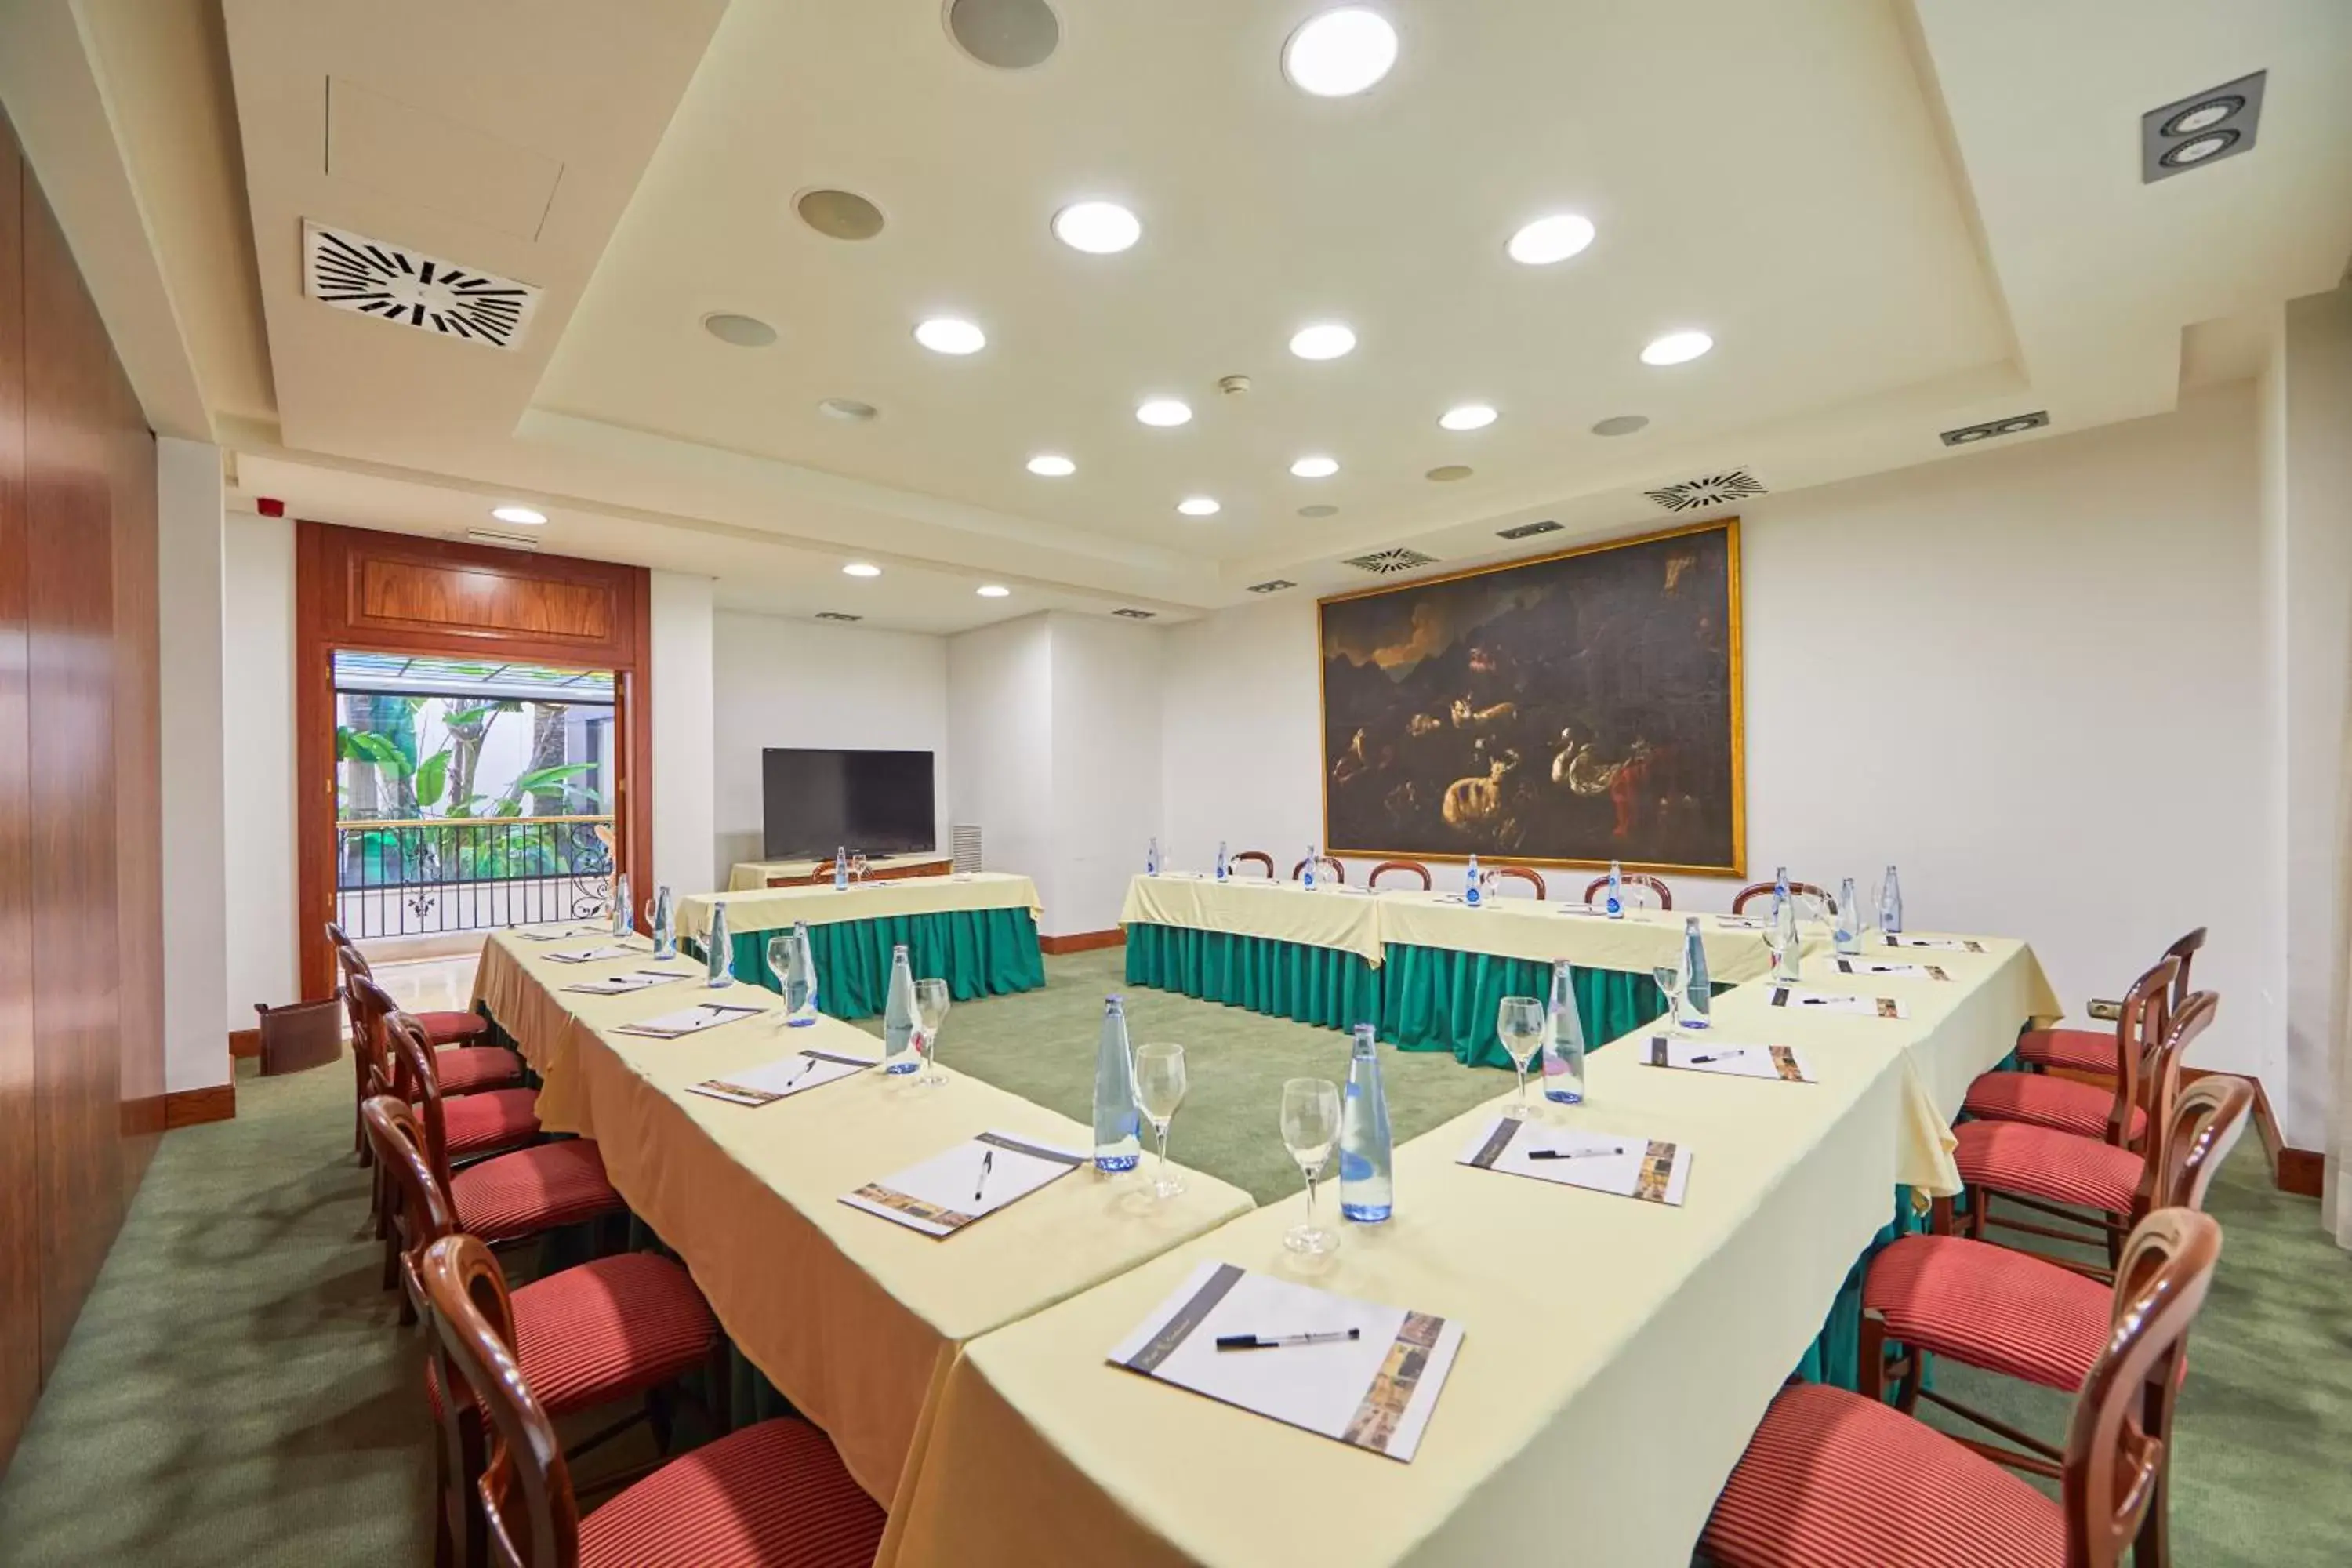 Meeting/conference room in Bordoy Continental Palma